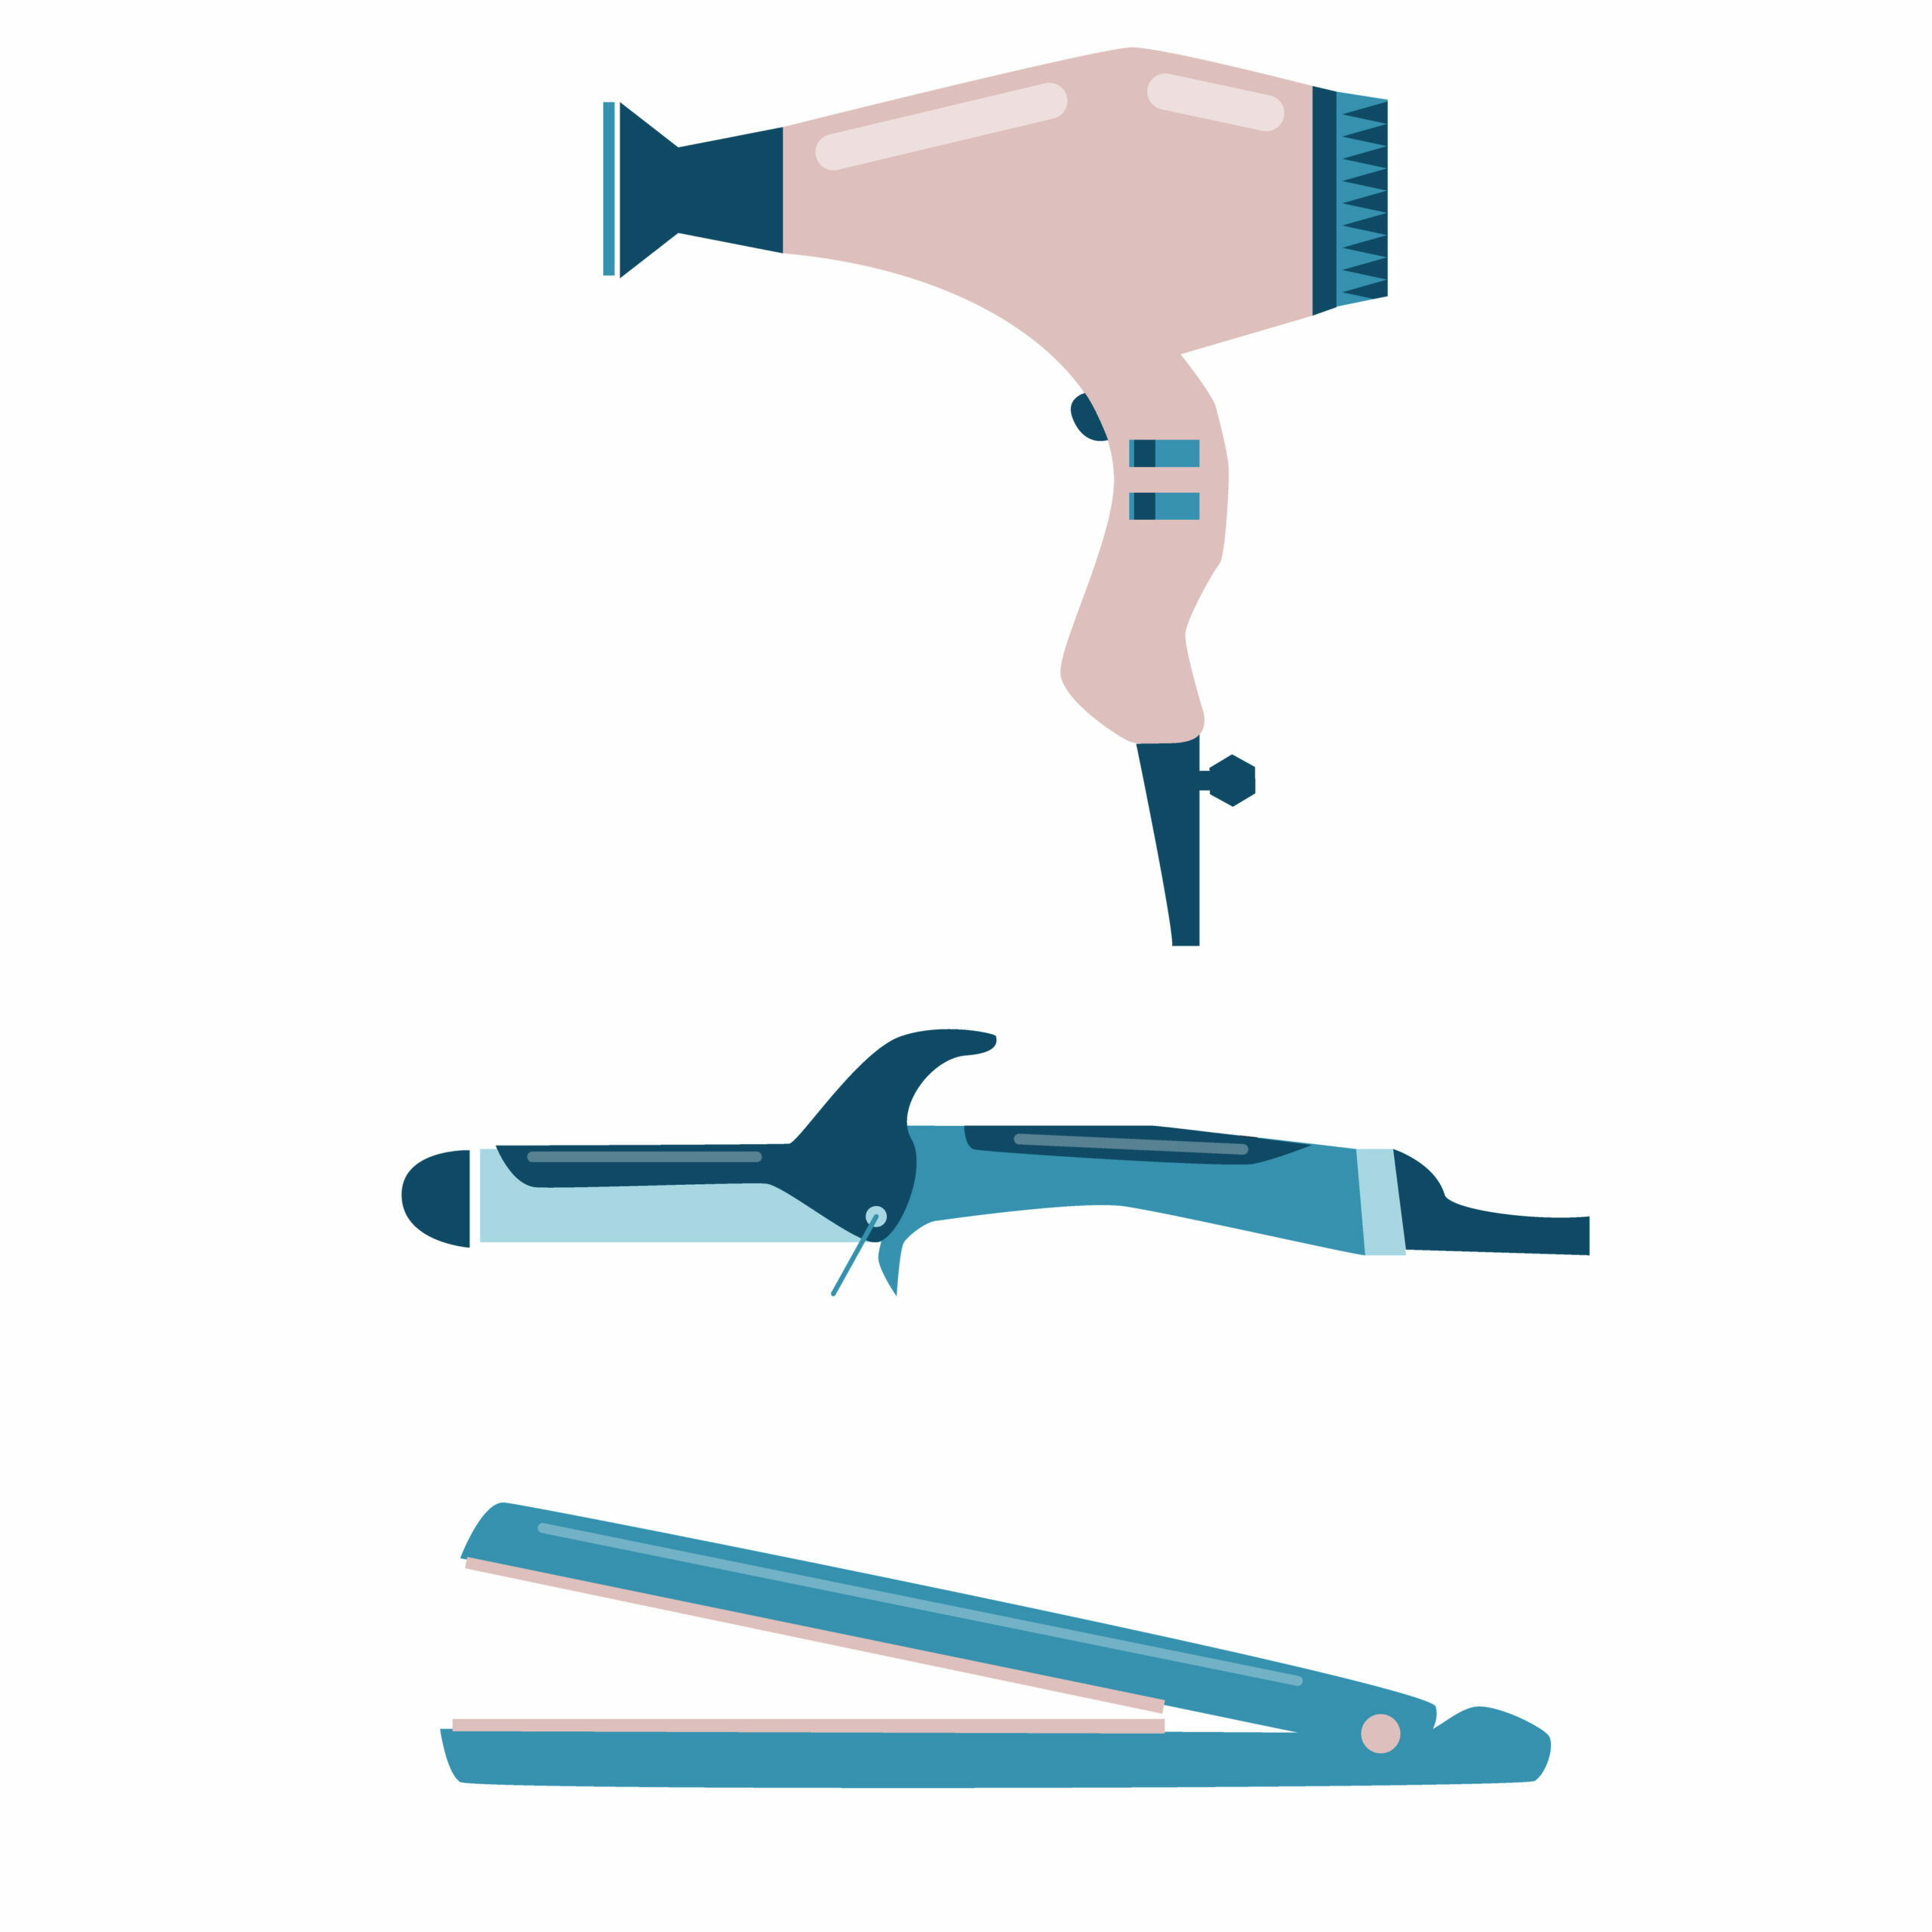 Hairdo make set with hair straightener, curling iron and hair dryer. Hairdresser tool flat isoleted vector icon